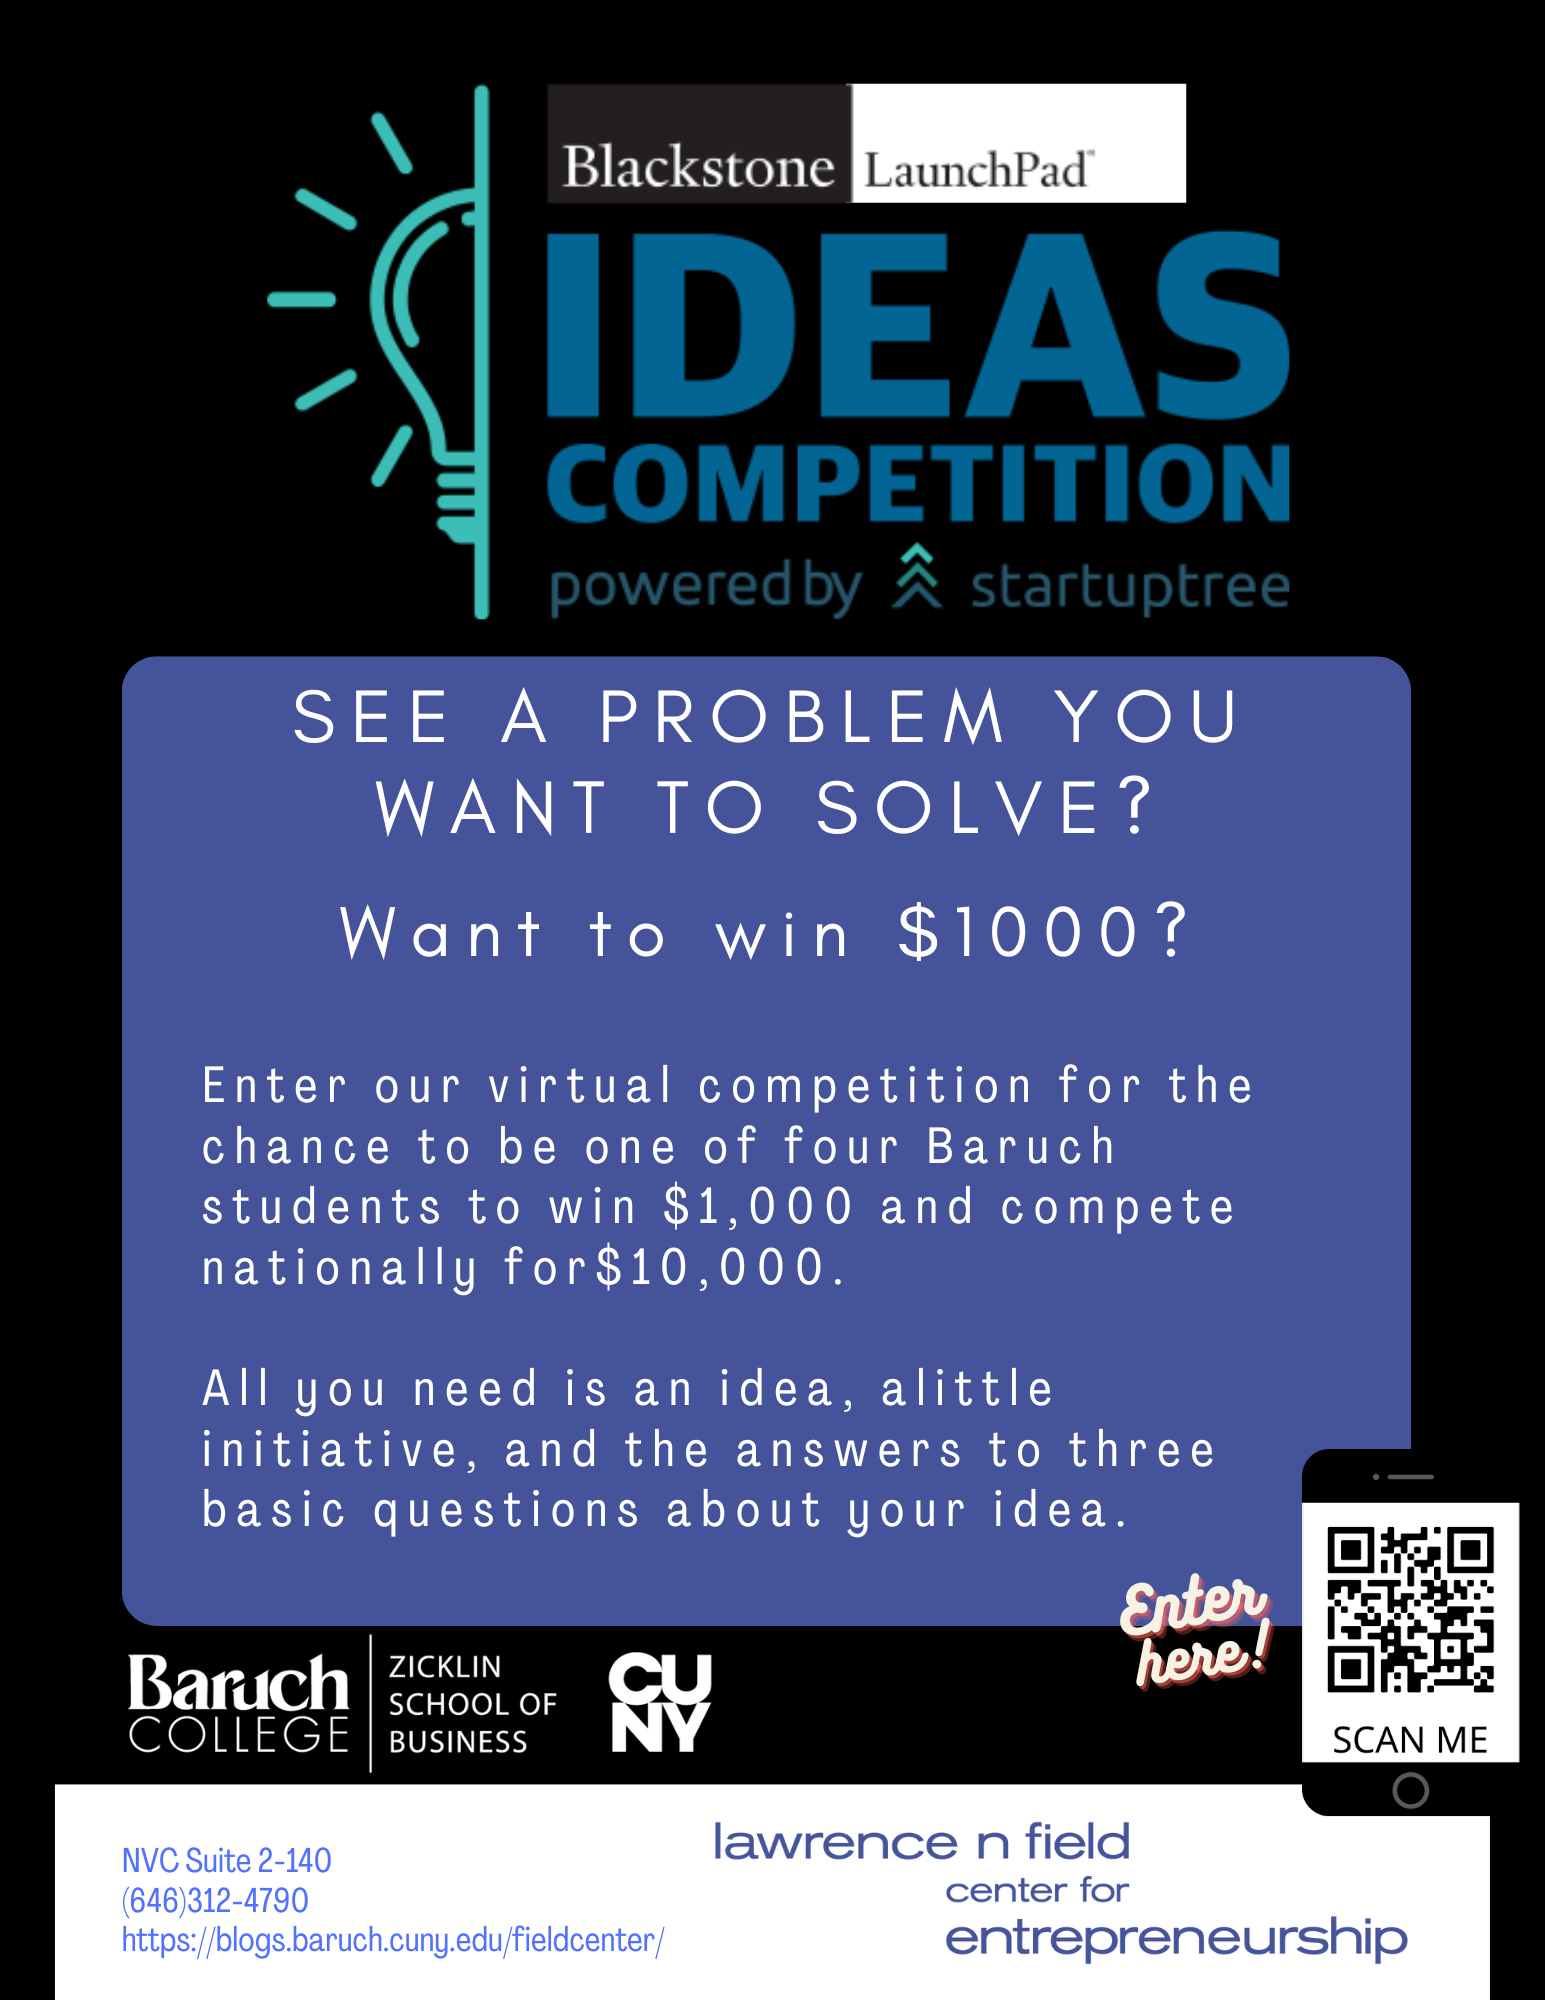 The Ideas Competition is Open! Blackstone LaunchPad at Baruch College